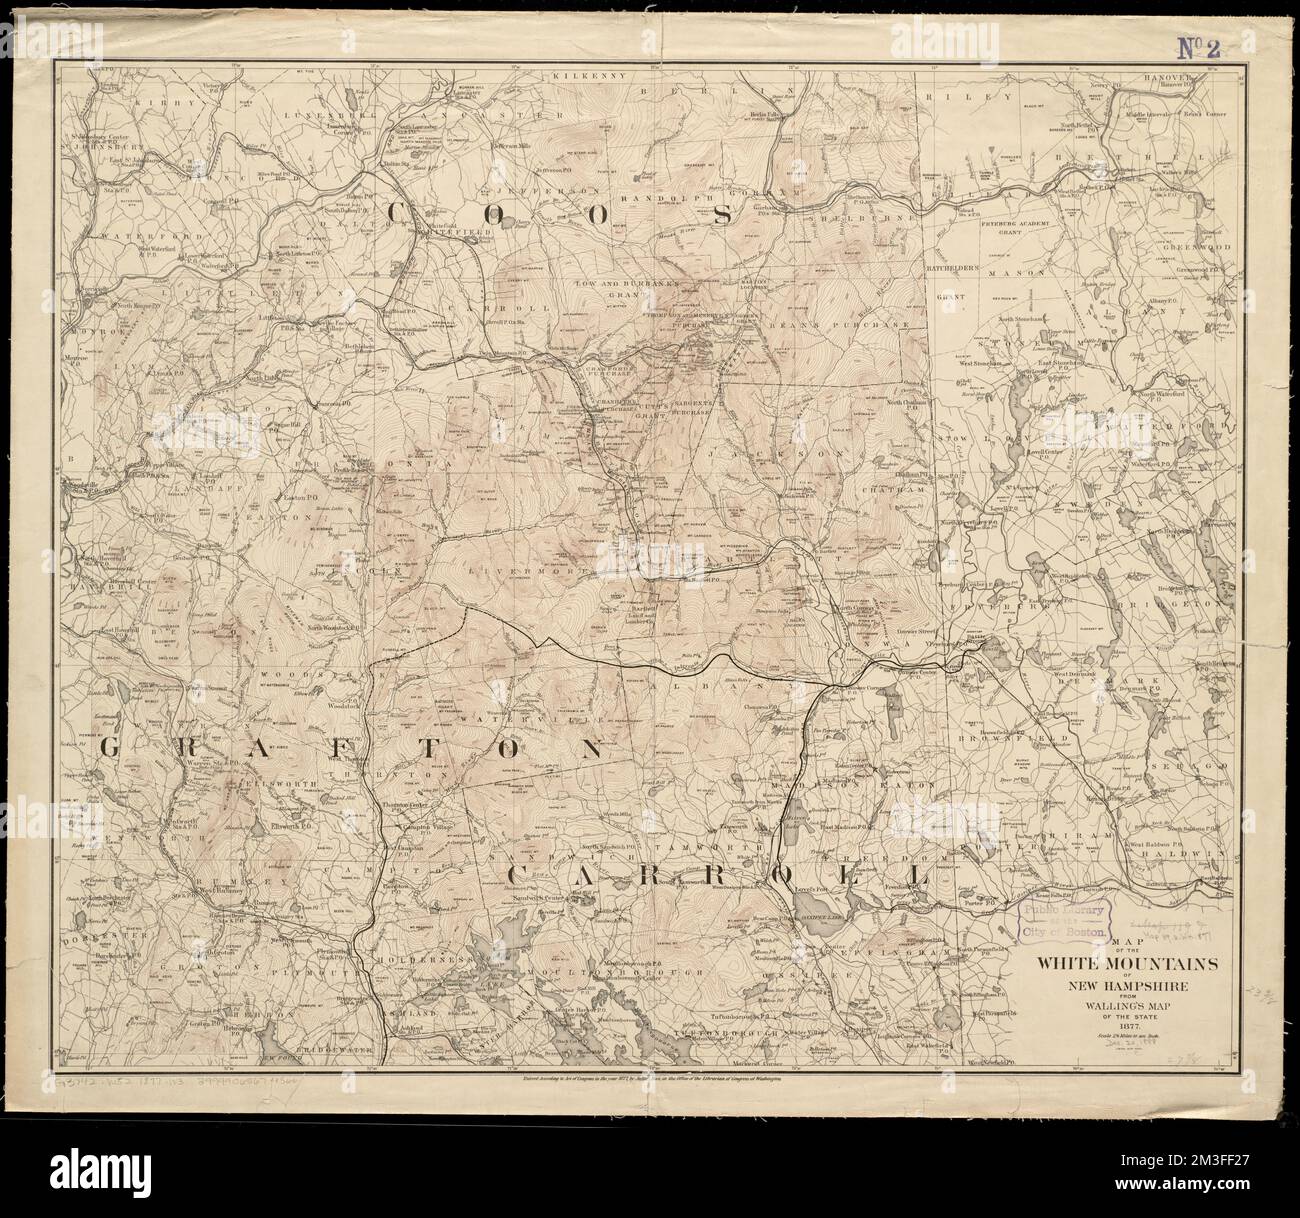 Karte der White Mountains von New Hampshire aus der Karte des Bundesstaates 1877 , White Mountains N.H. and Me., Maps, 1877 Norman B. Leventhal Map Center Collection Stockfoto